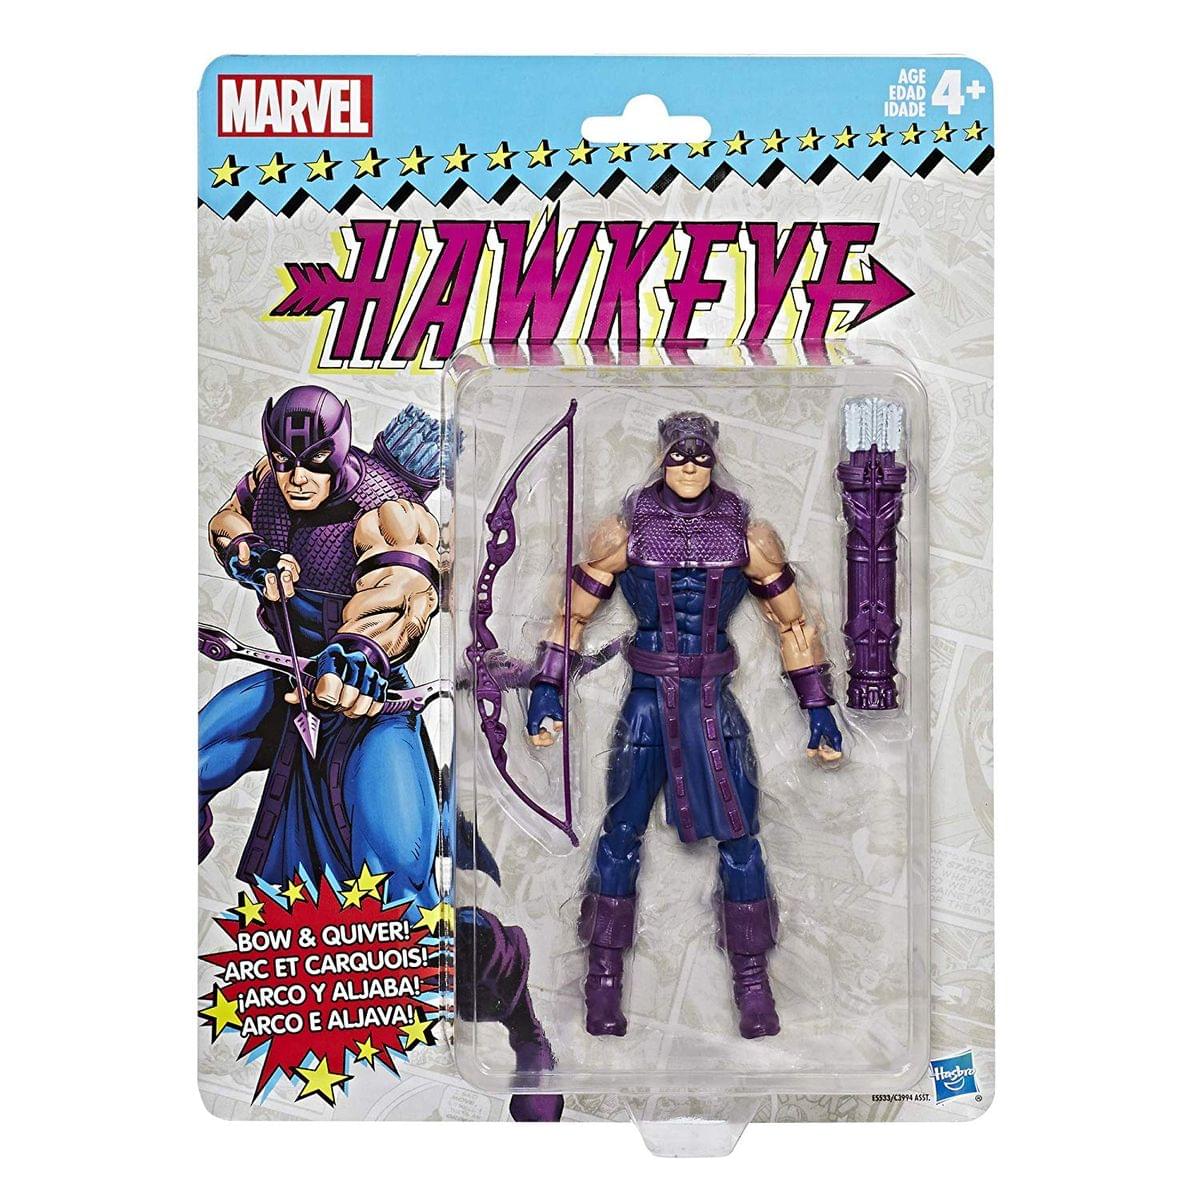 Marvel Retro Collection 6-Inch Action Figure - Hawkeye